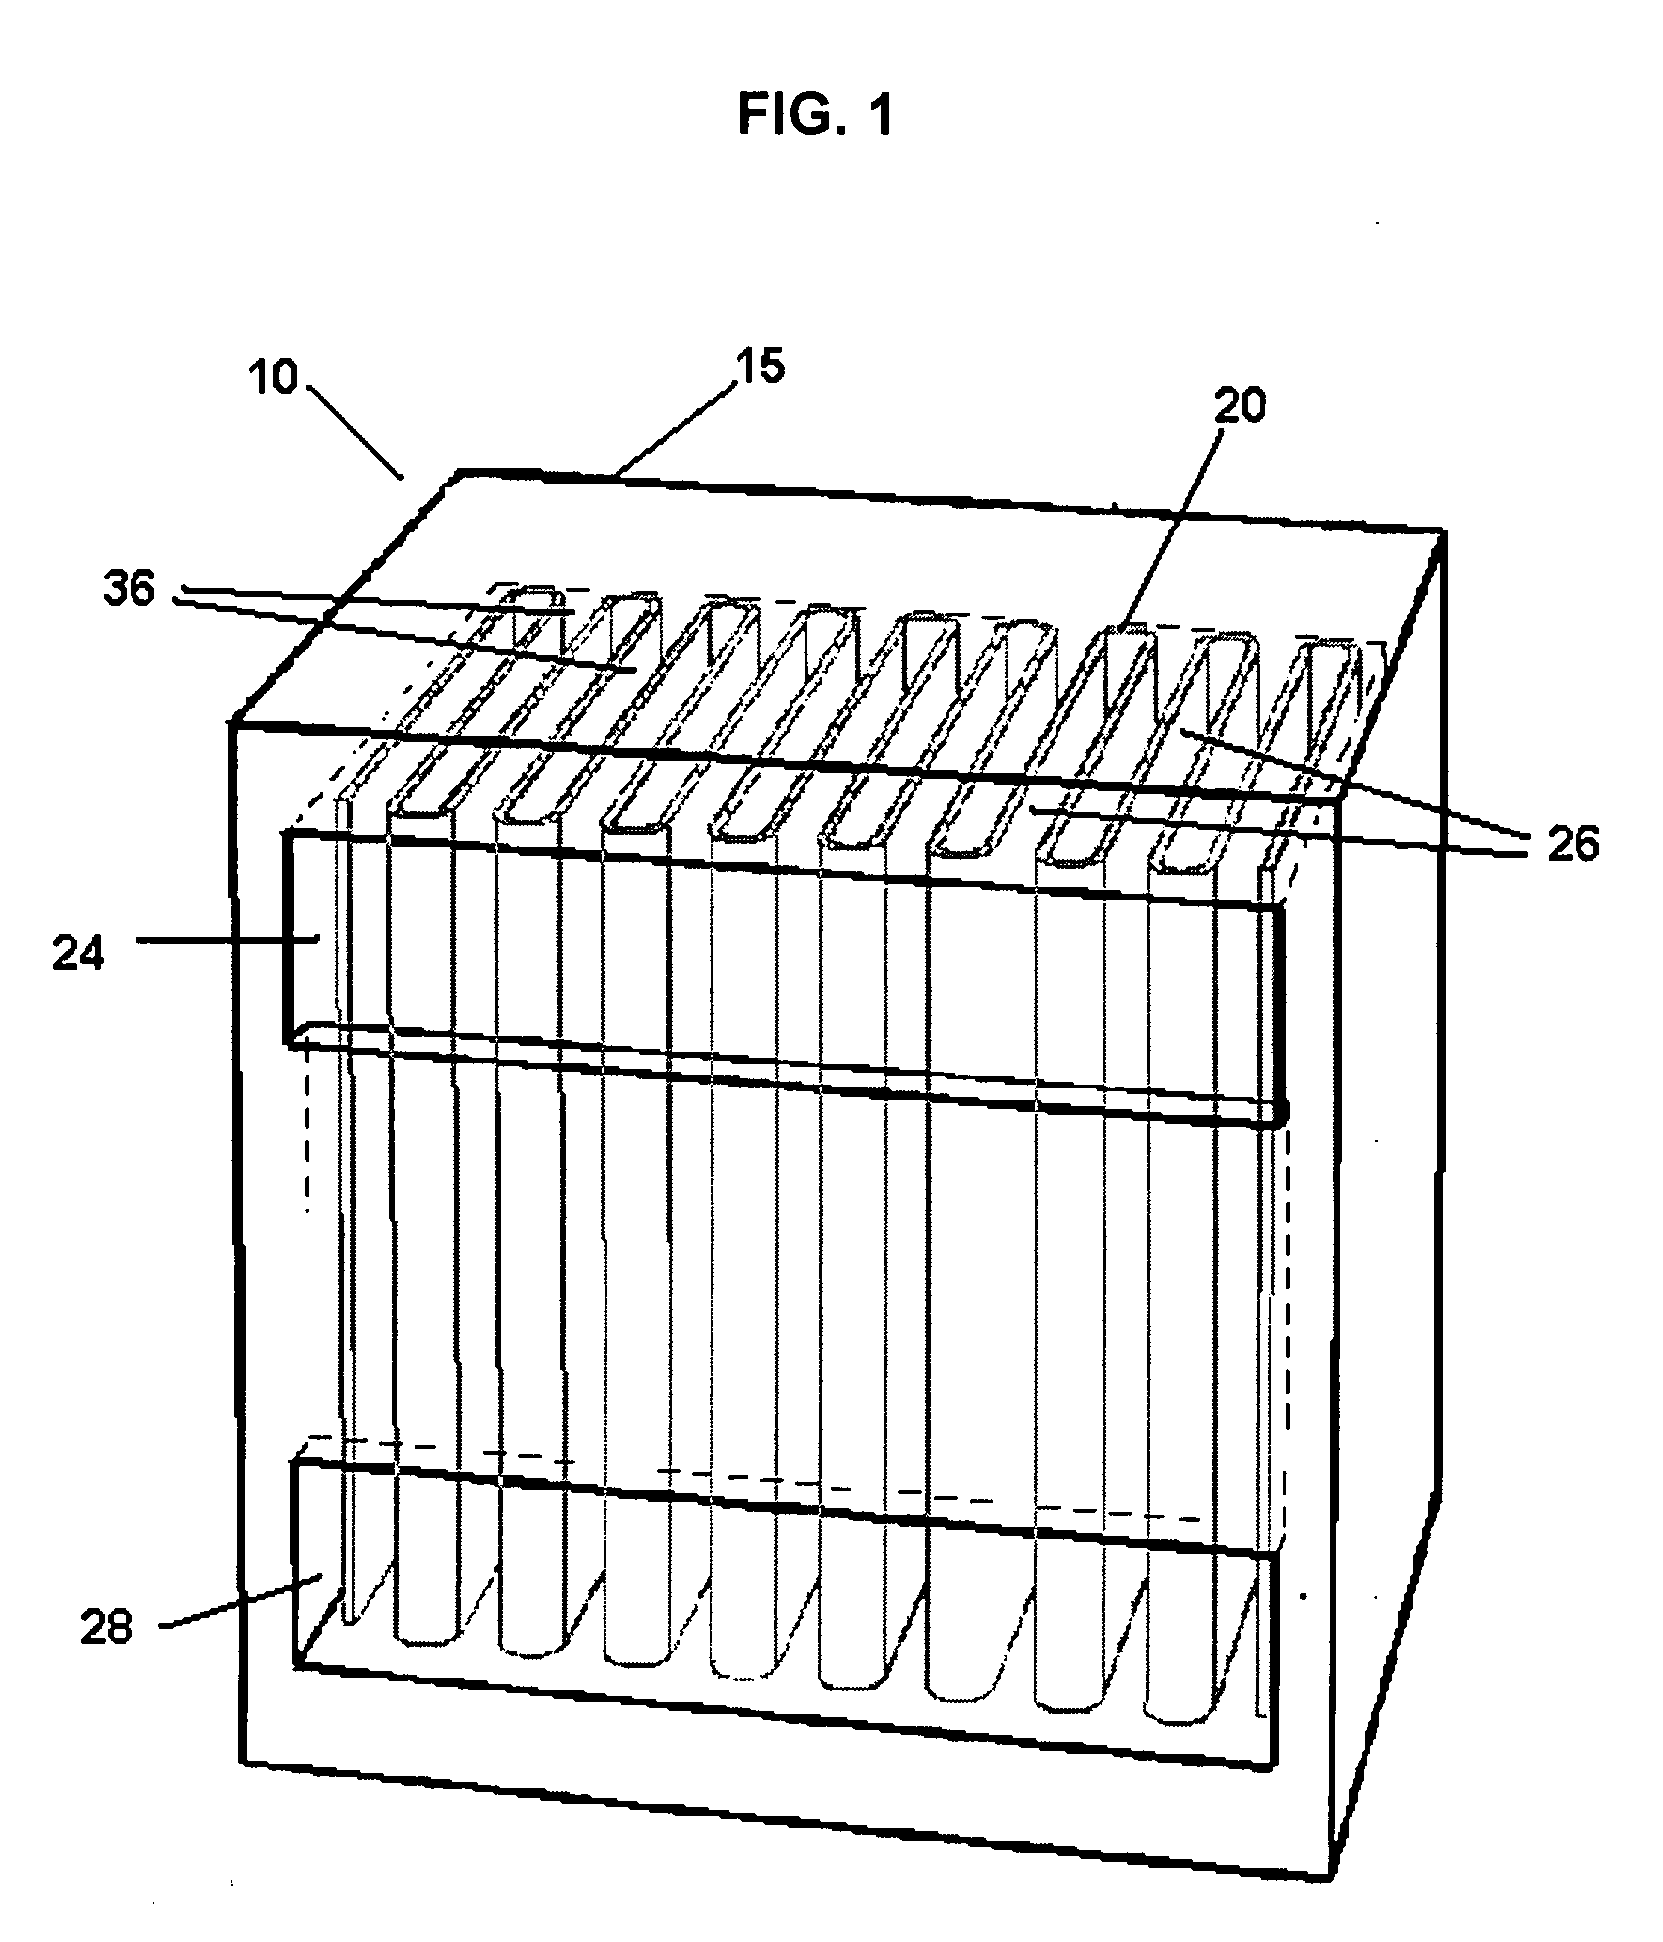 Pleated heat and humidity exchanger with flow field elements